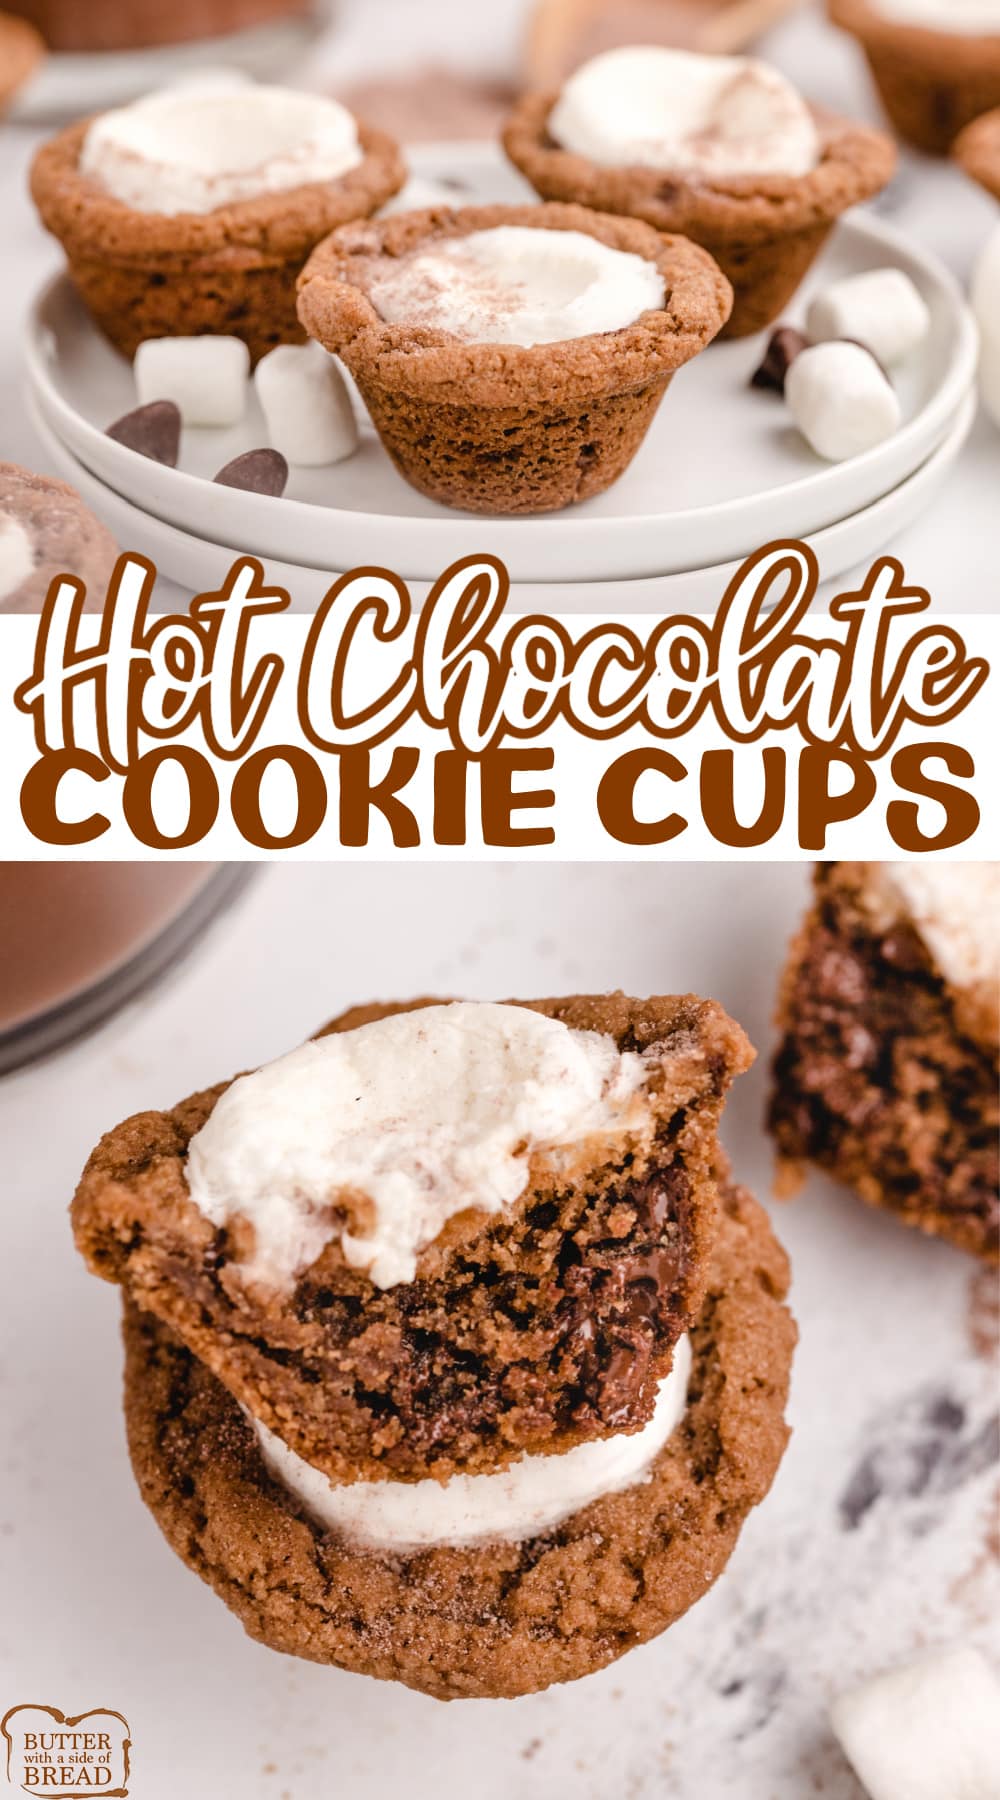 Hot Chocolate Marshmallow Cookie Cups are easily made with hot chocolate mix, marshmallows and a few other basic ingredients. The perfect bite sized winter cookie recipe!